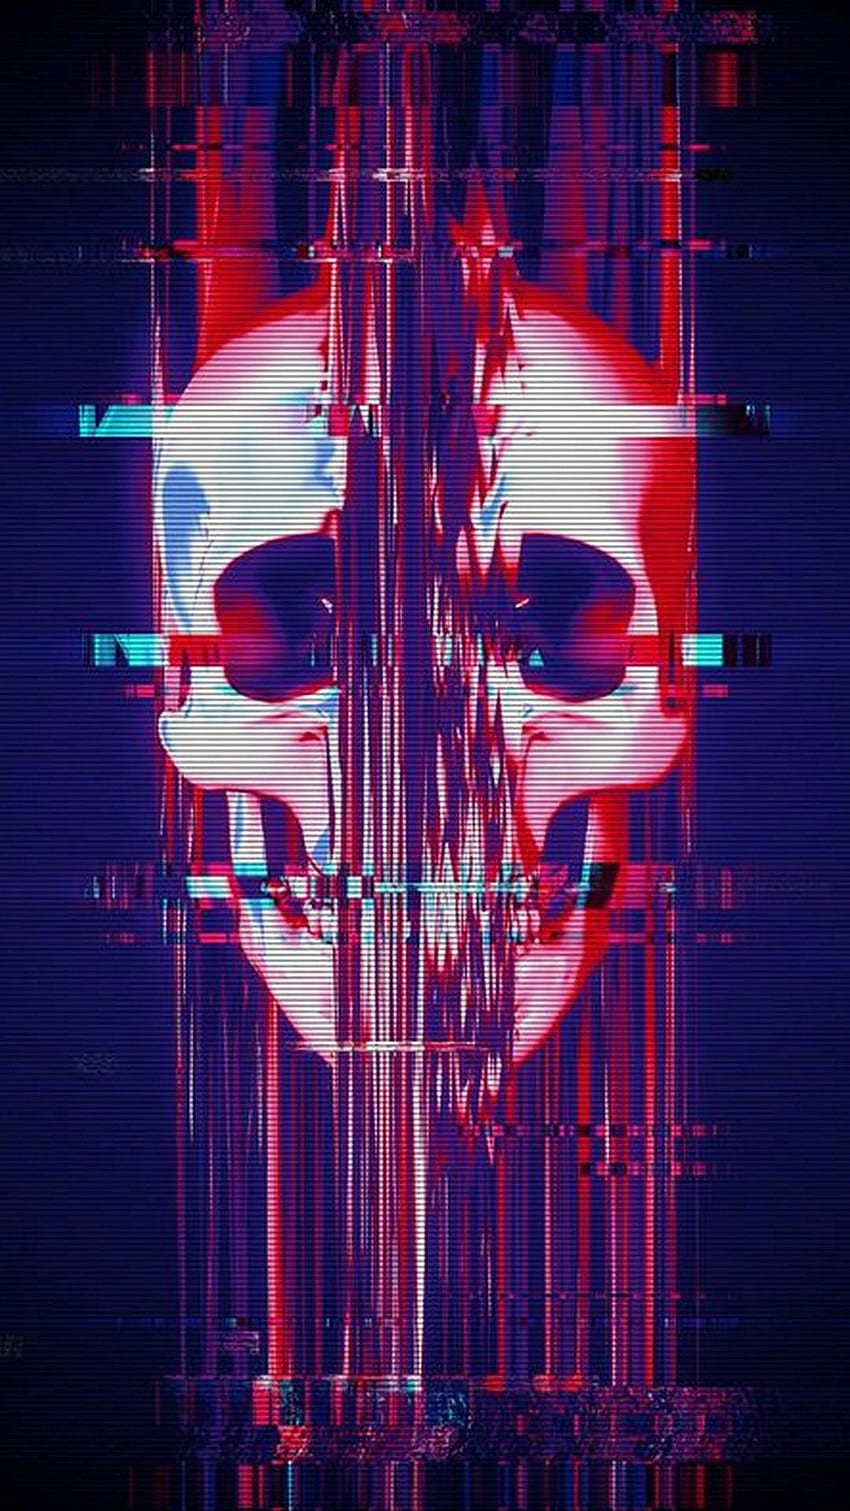 Glitch art Effect for Android APK, Glitchy HD phone wallpaper